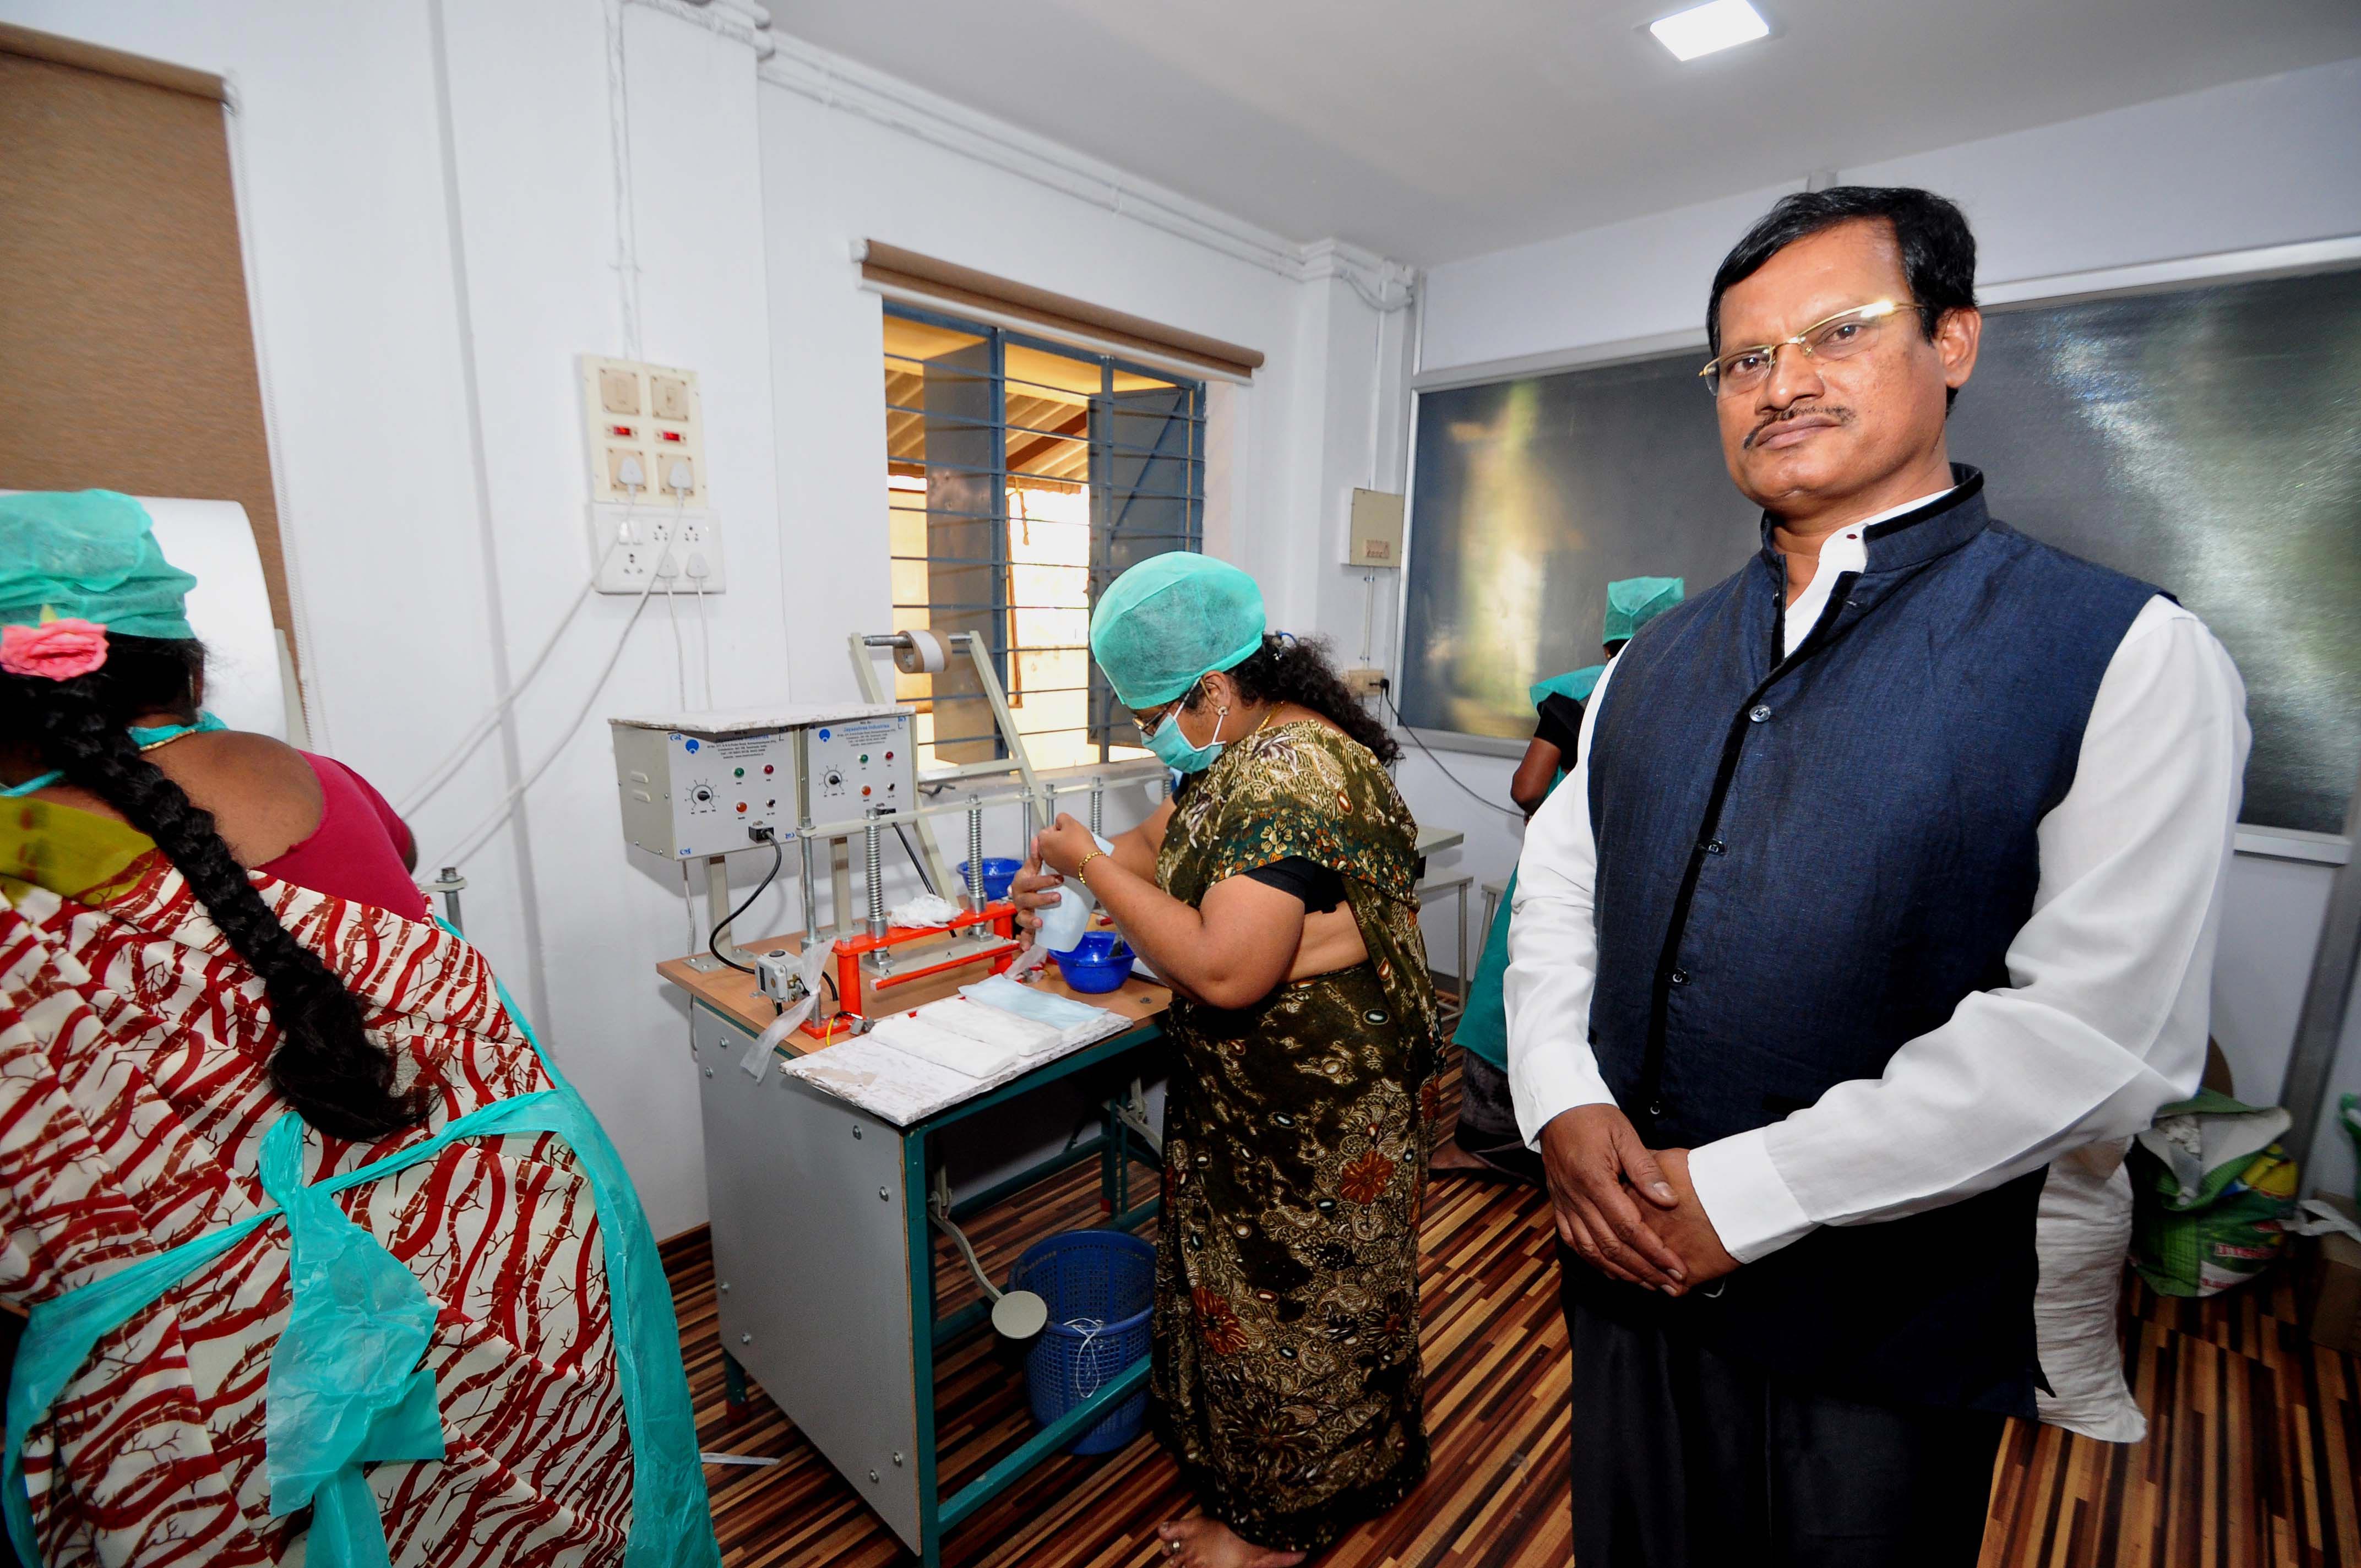 The Weekend Leader - Story of Arunachalam Muruganantham, inventor of low cost sanitary napkin and the real-life Pad Man 